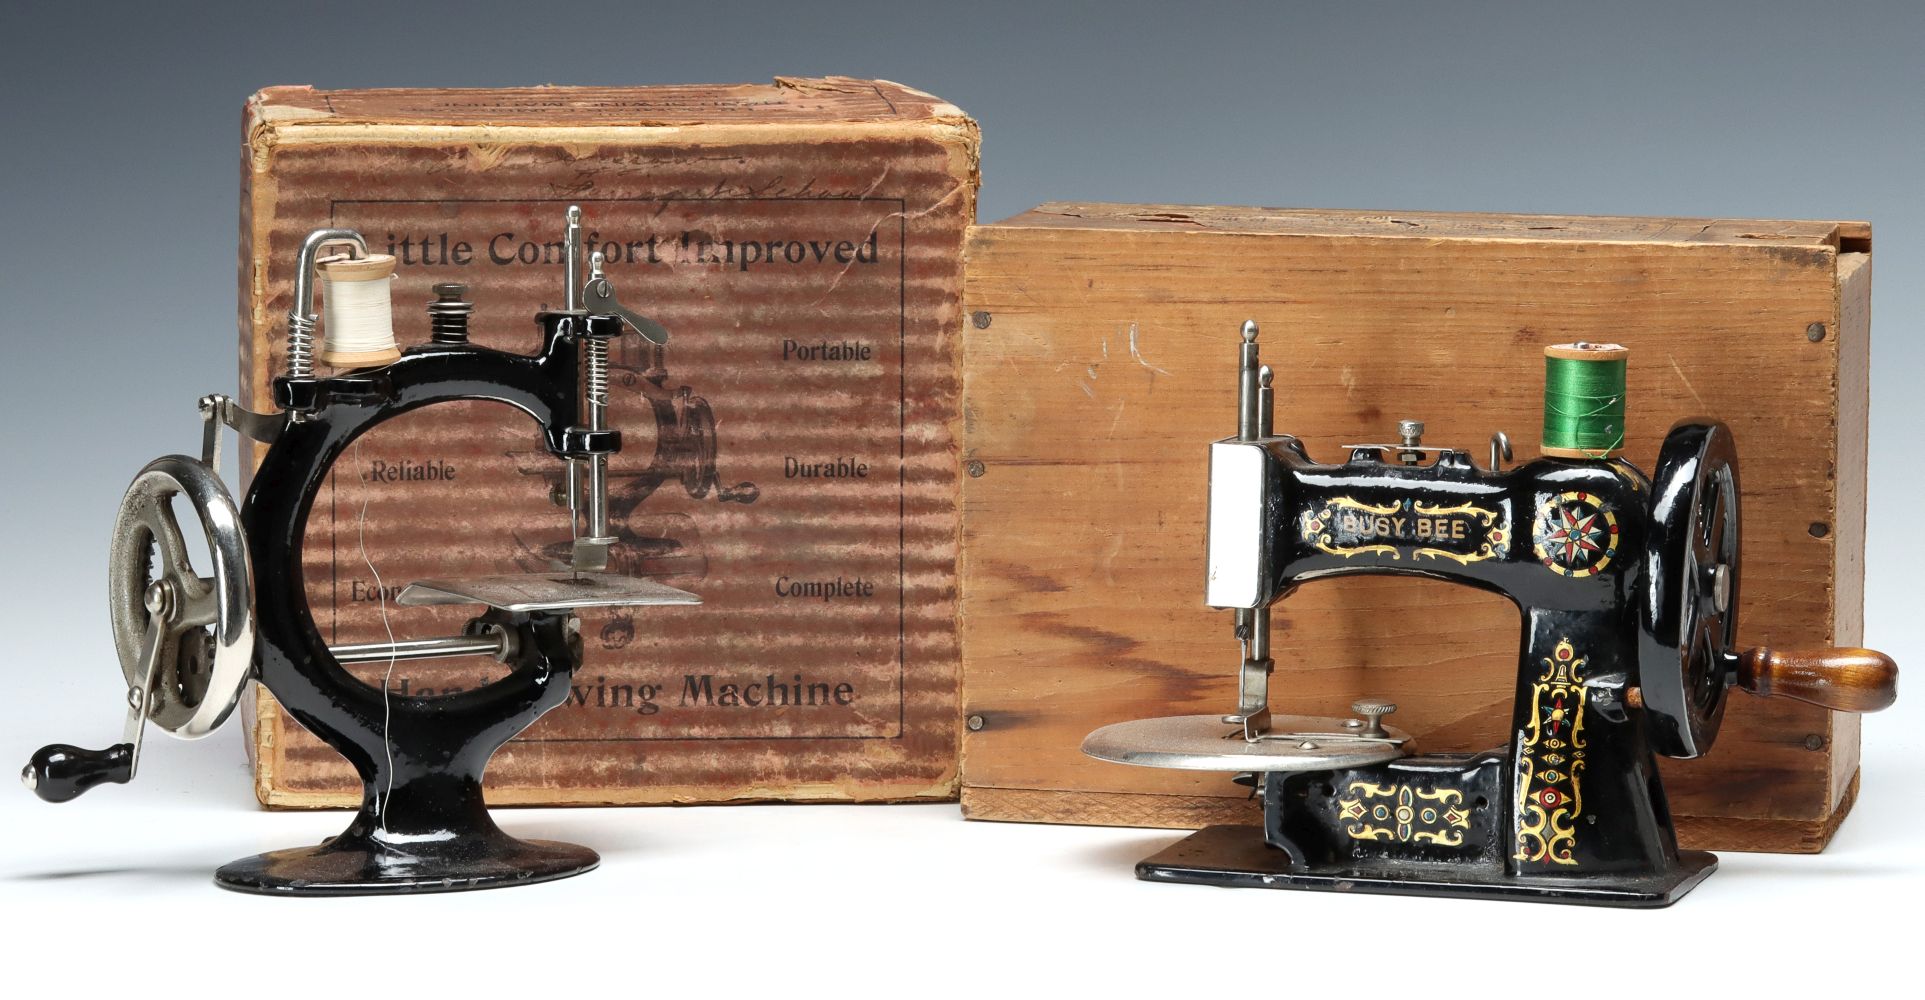 'BUSY BEE' AND 'LITTLE COMFORT' TOY SEWING MACHINES